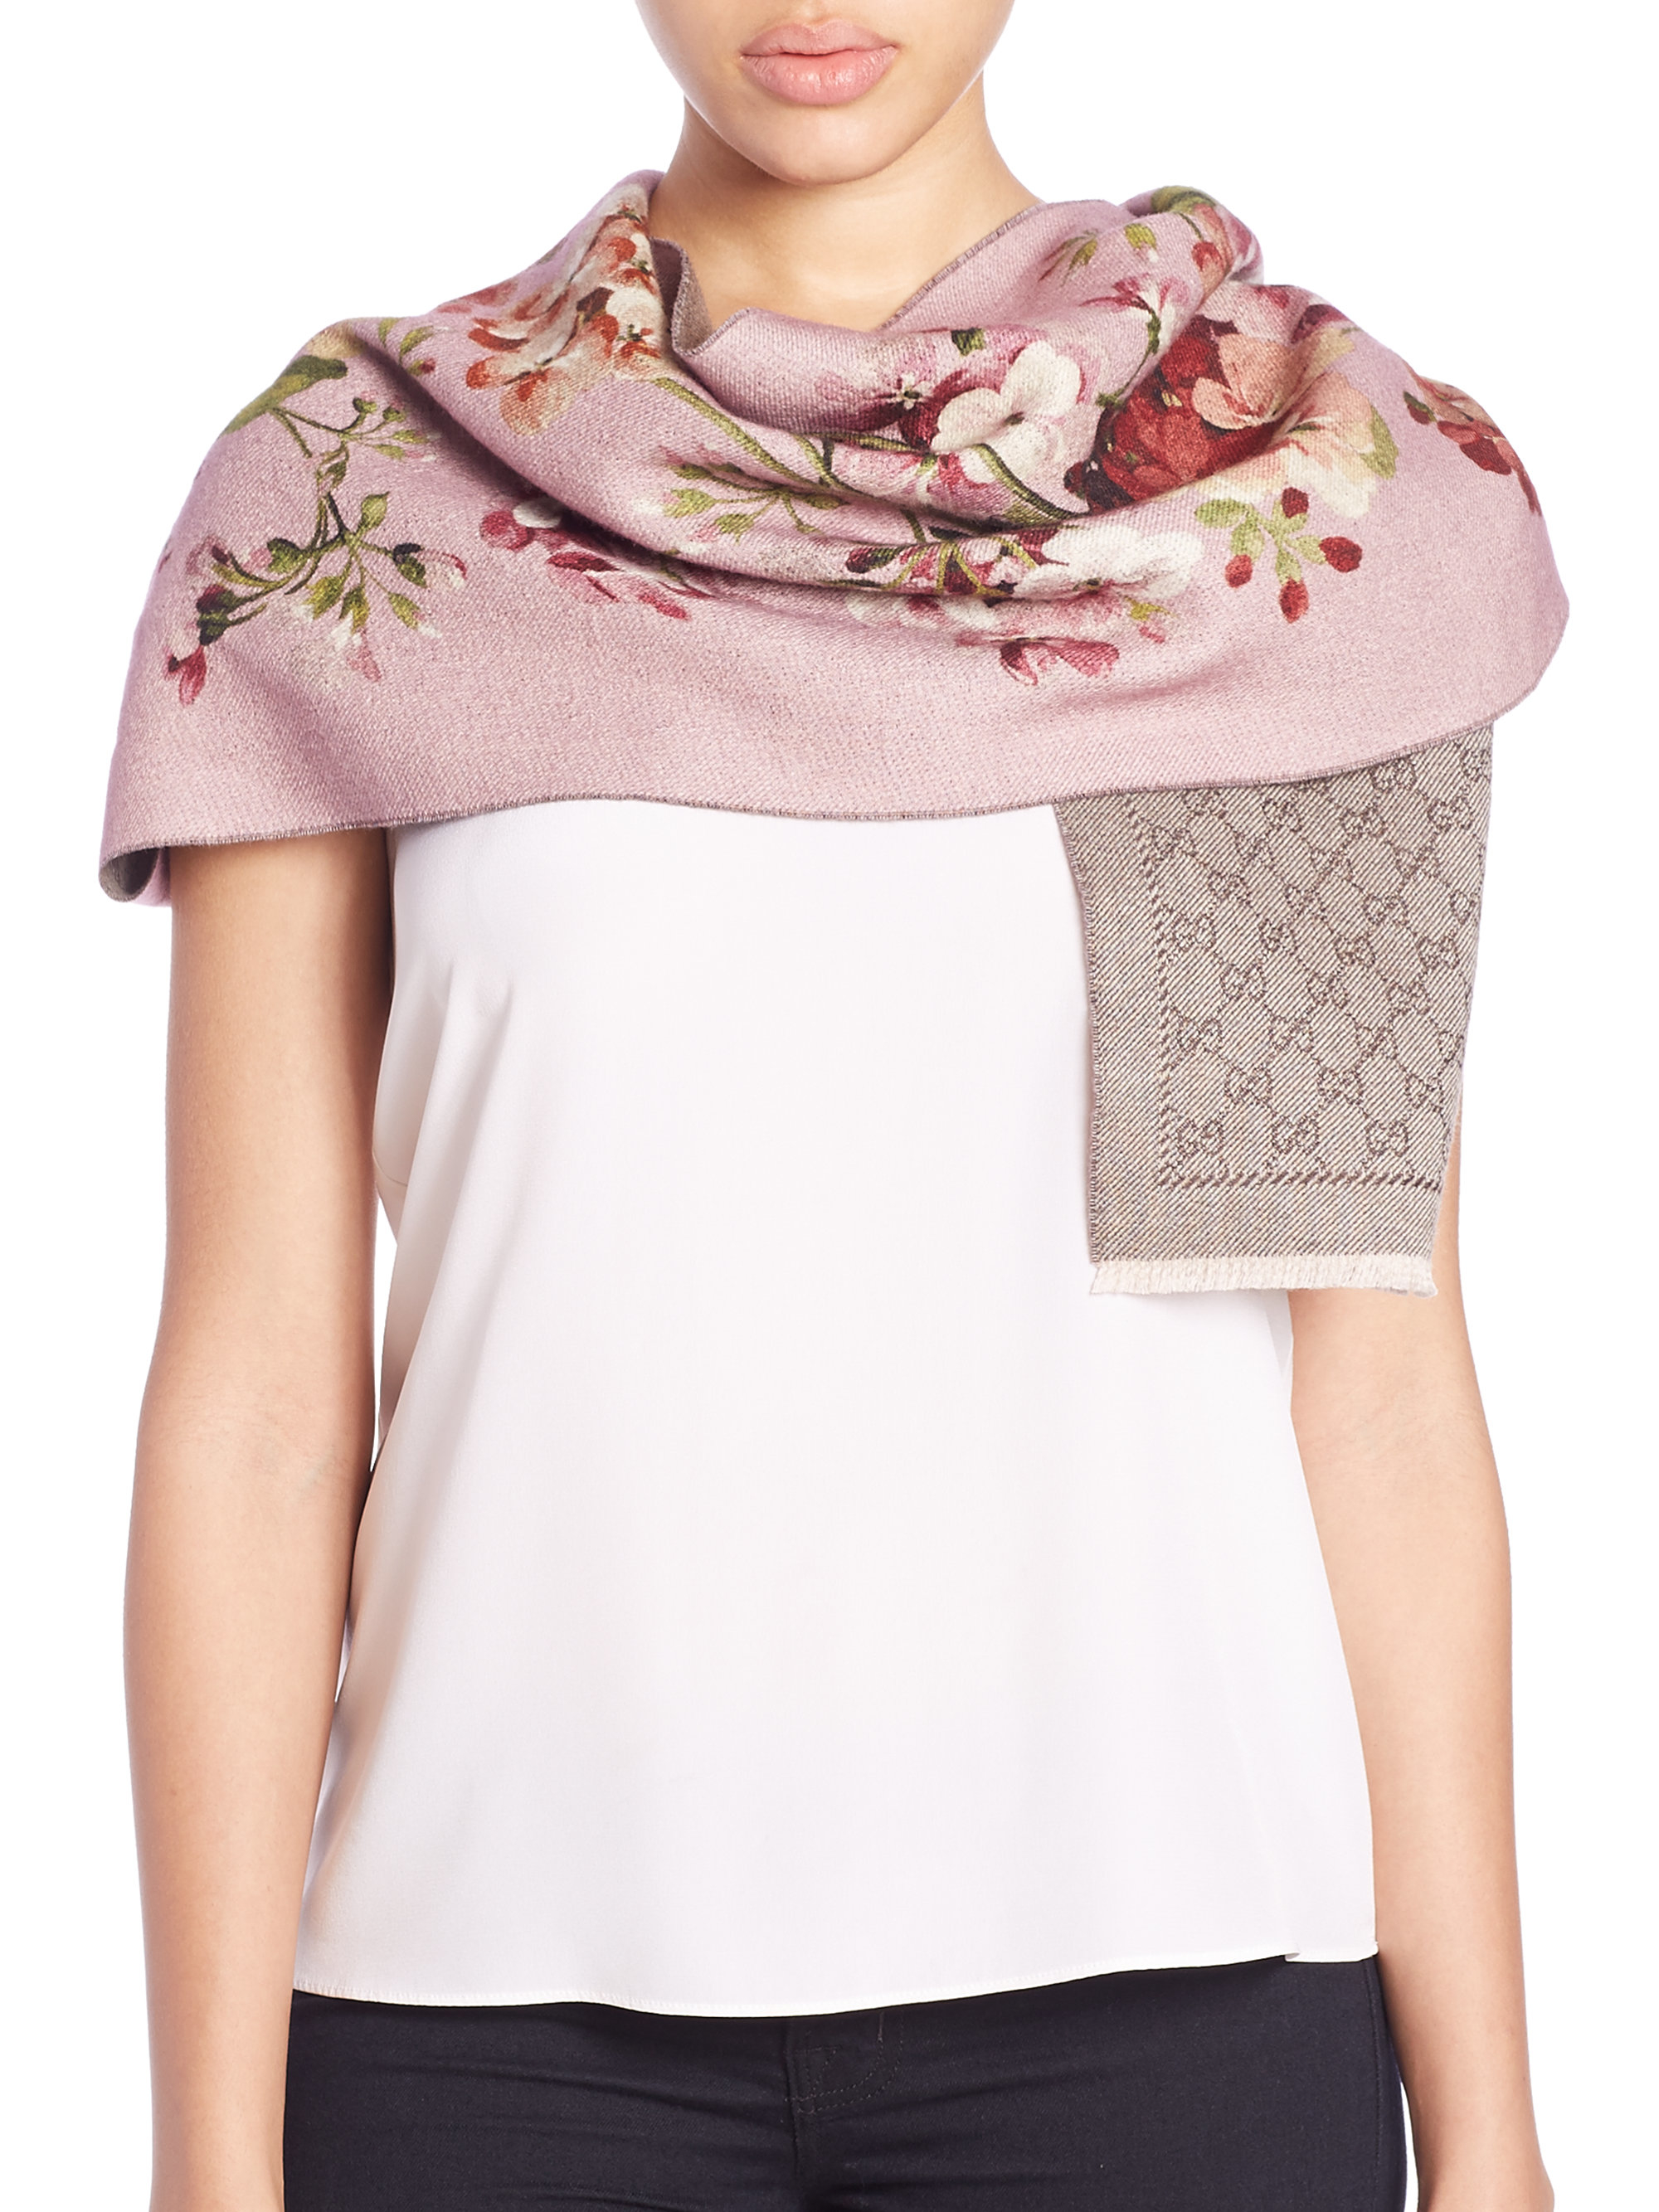 Gucci Floral Wool Orophin Scarf in Pink - Lyst